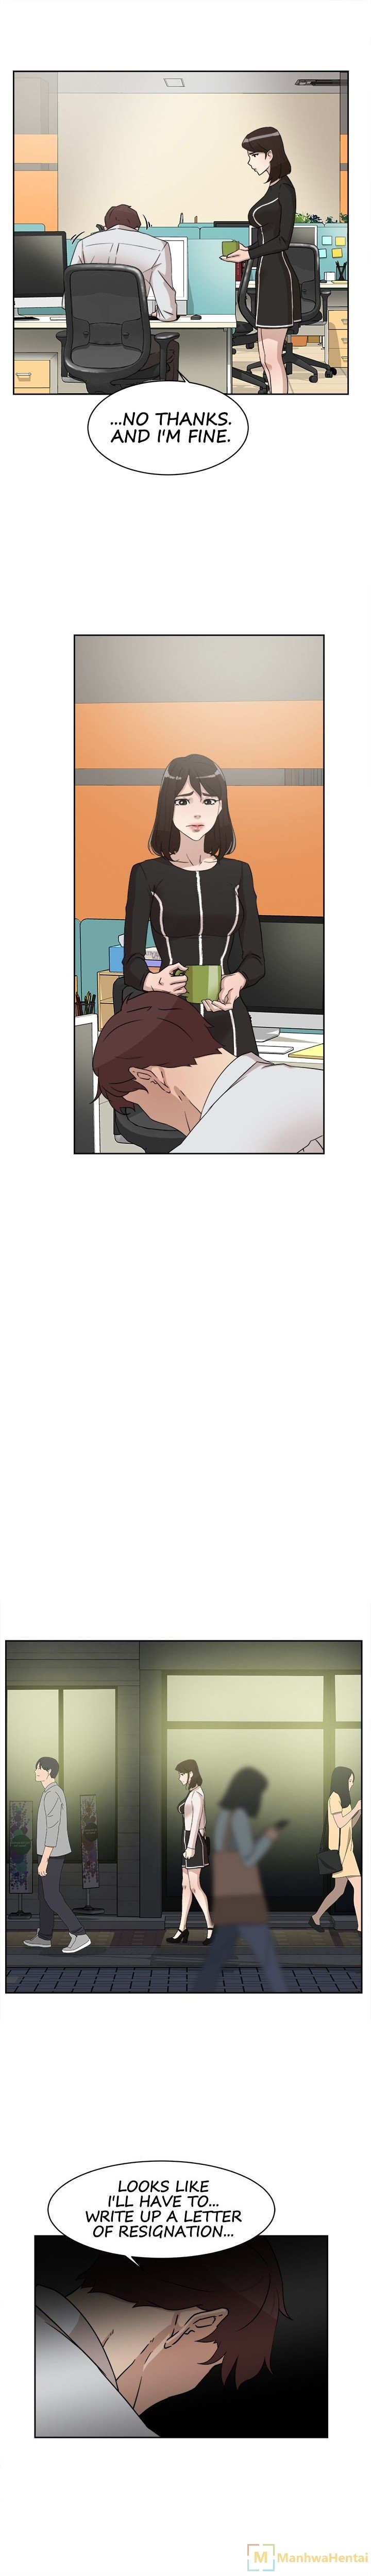 office-affairs-chap-38-4